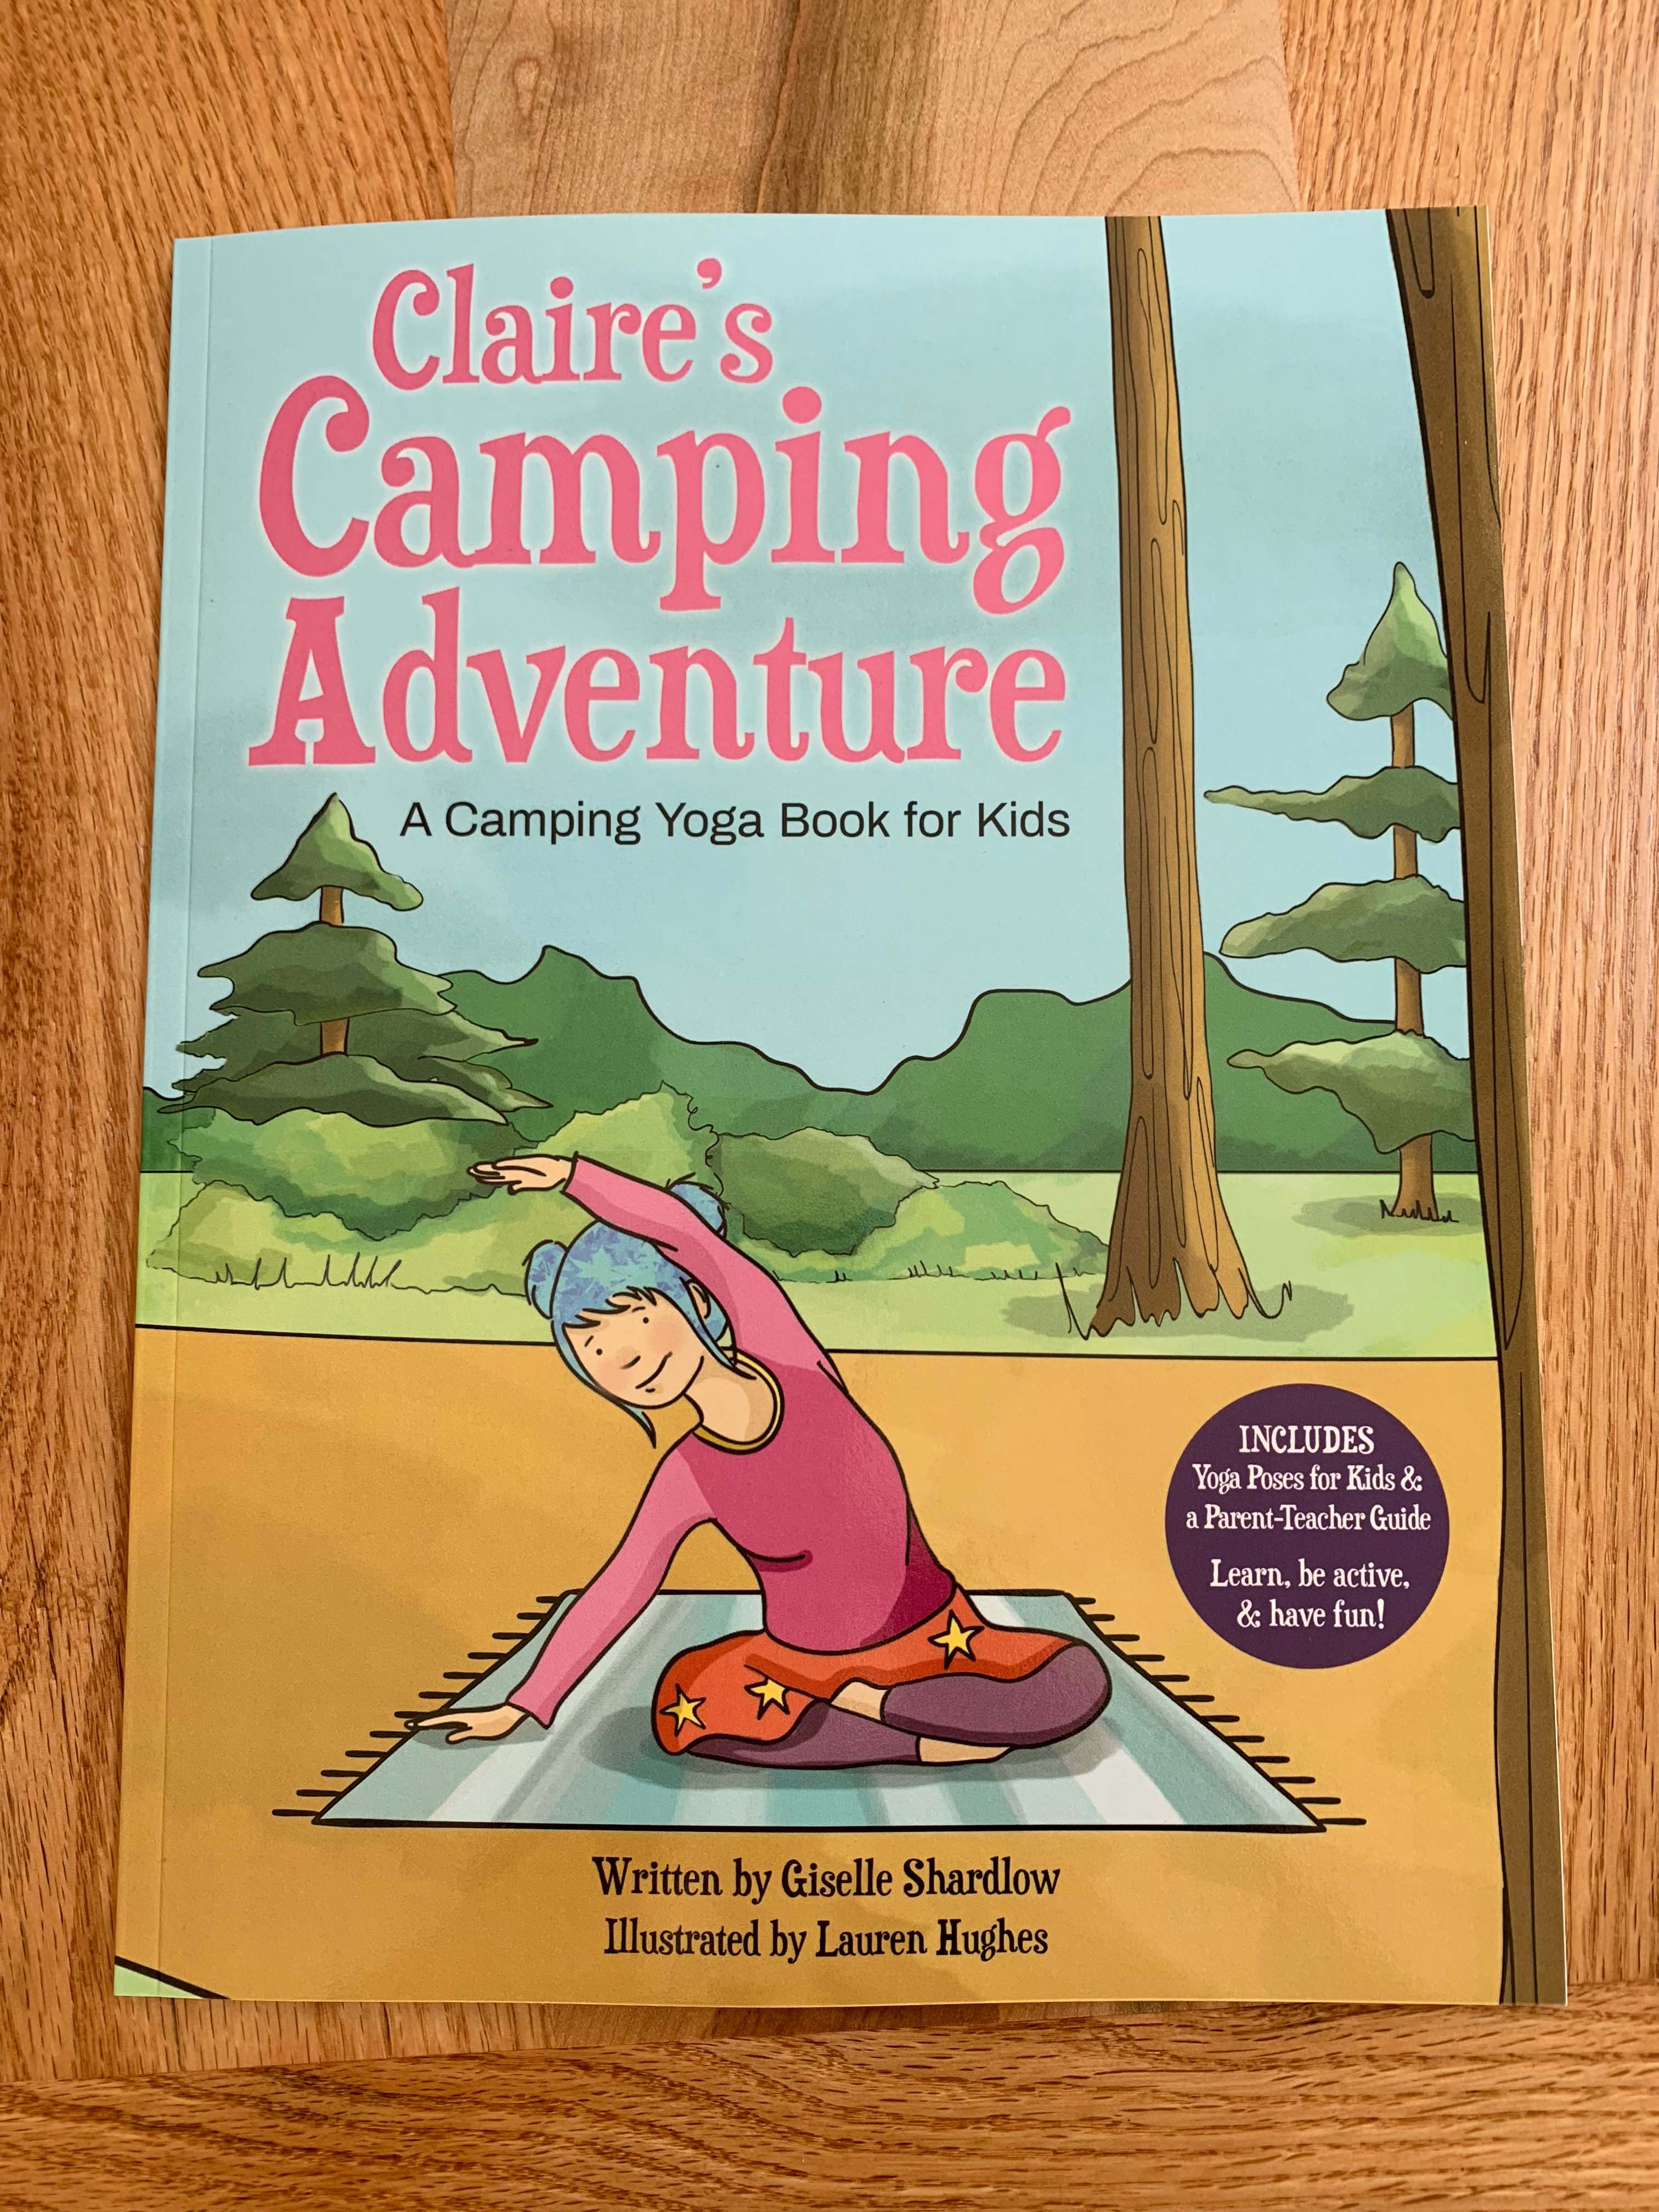 claires-camping-adventure cover2